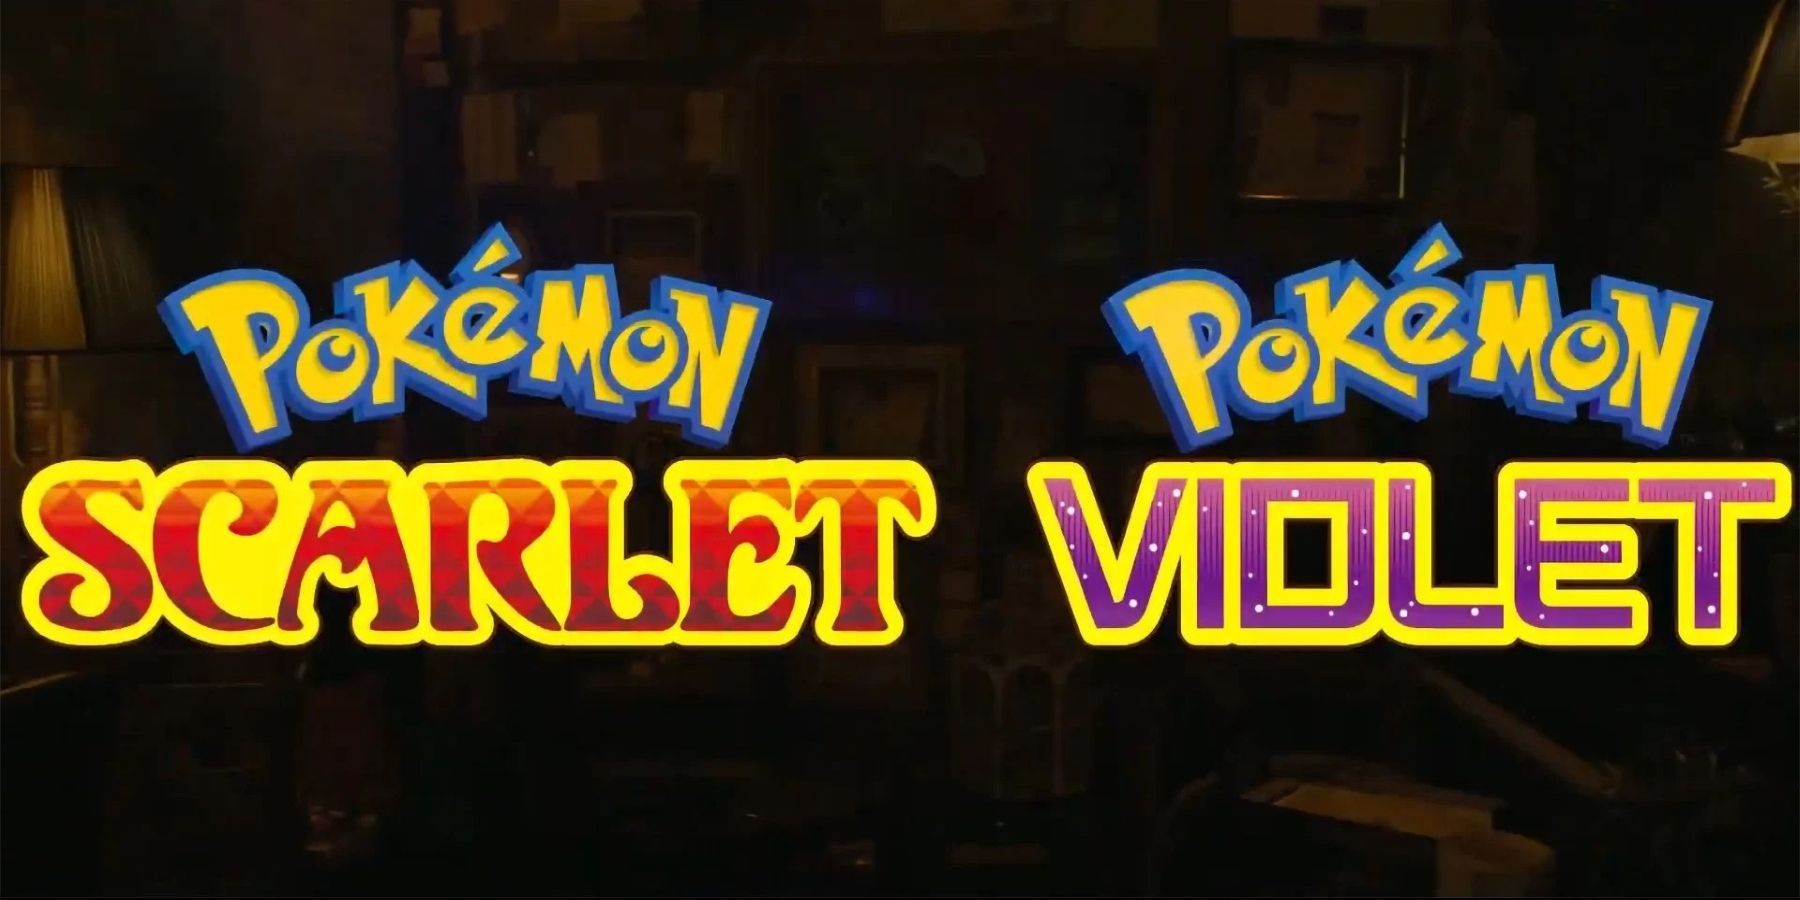 Pokemon Scarlet and Violet Reportedly Suffer From
Performance Issues